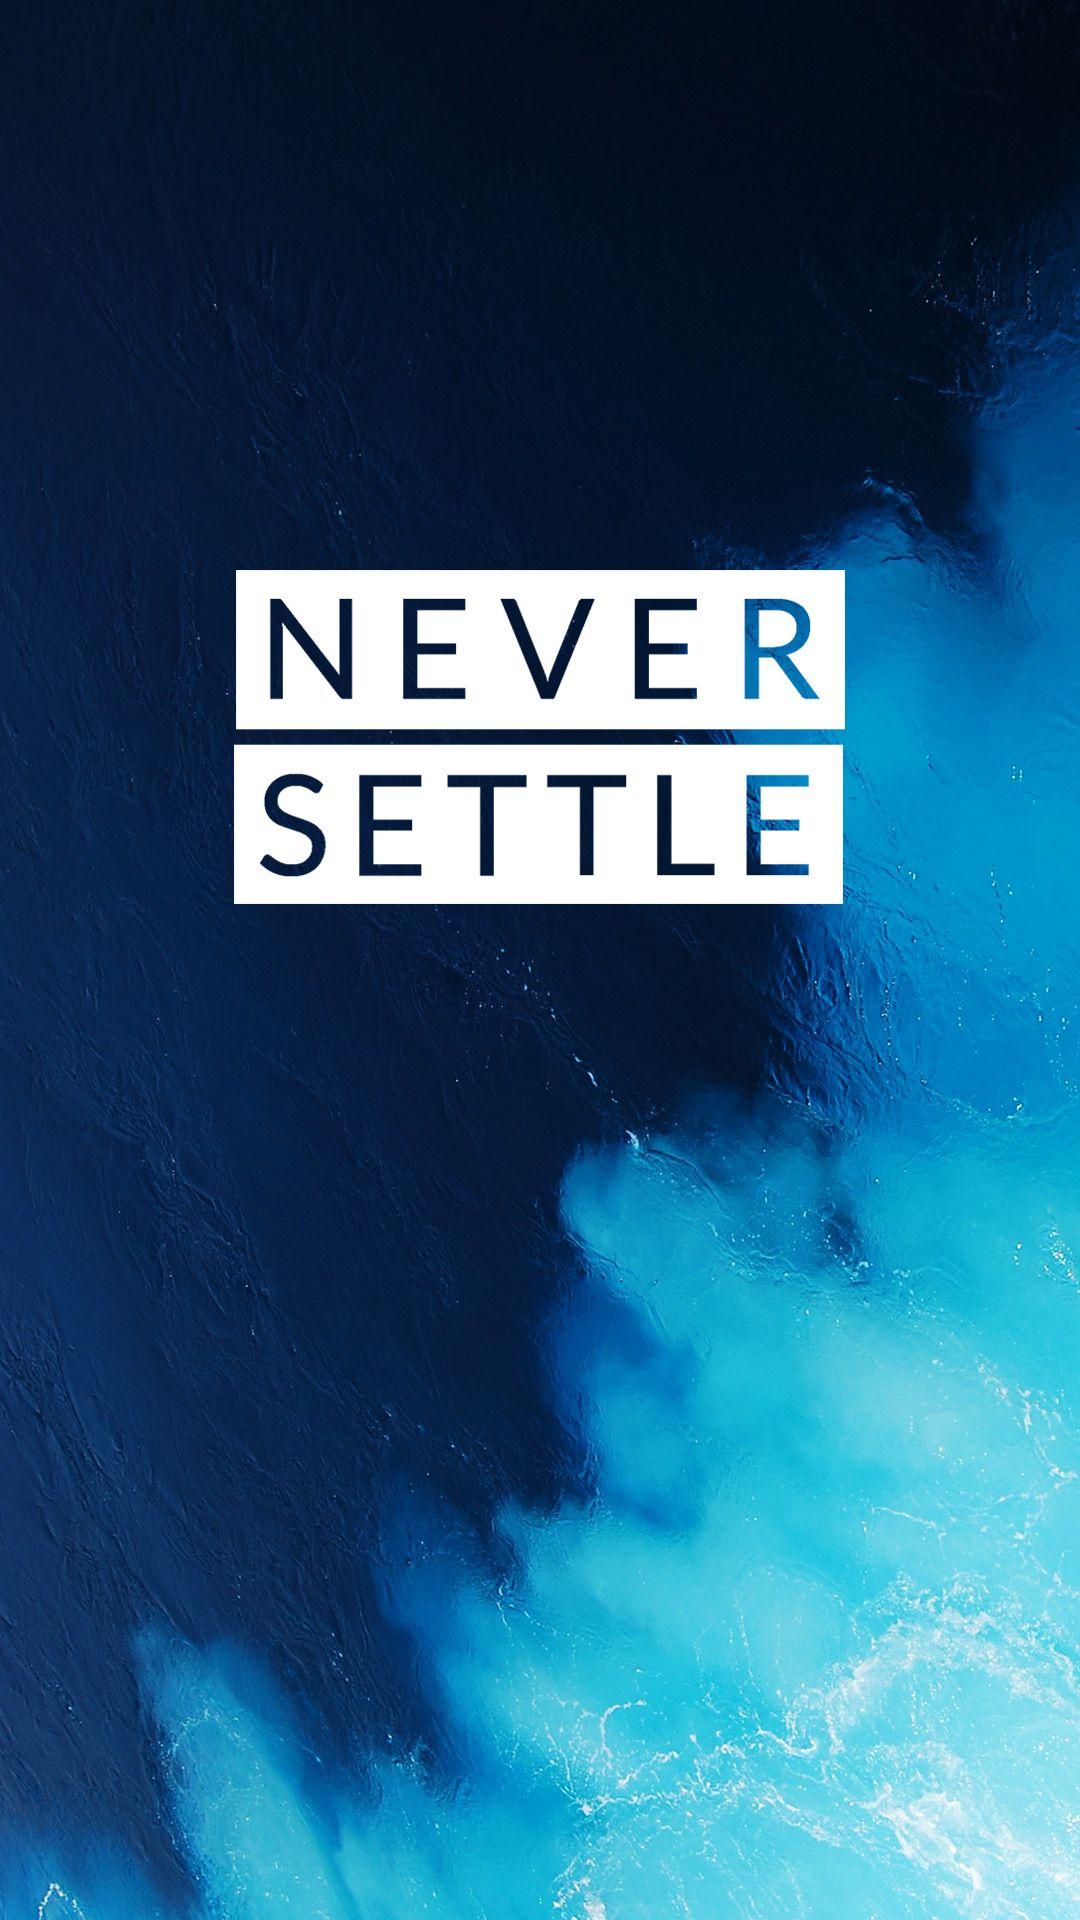 NEVER SETTLE GR wallpaper by irohan03  Download on ZEDGE  f4c7